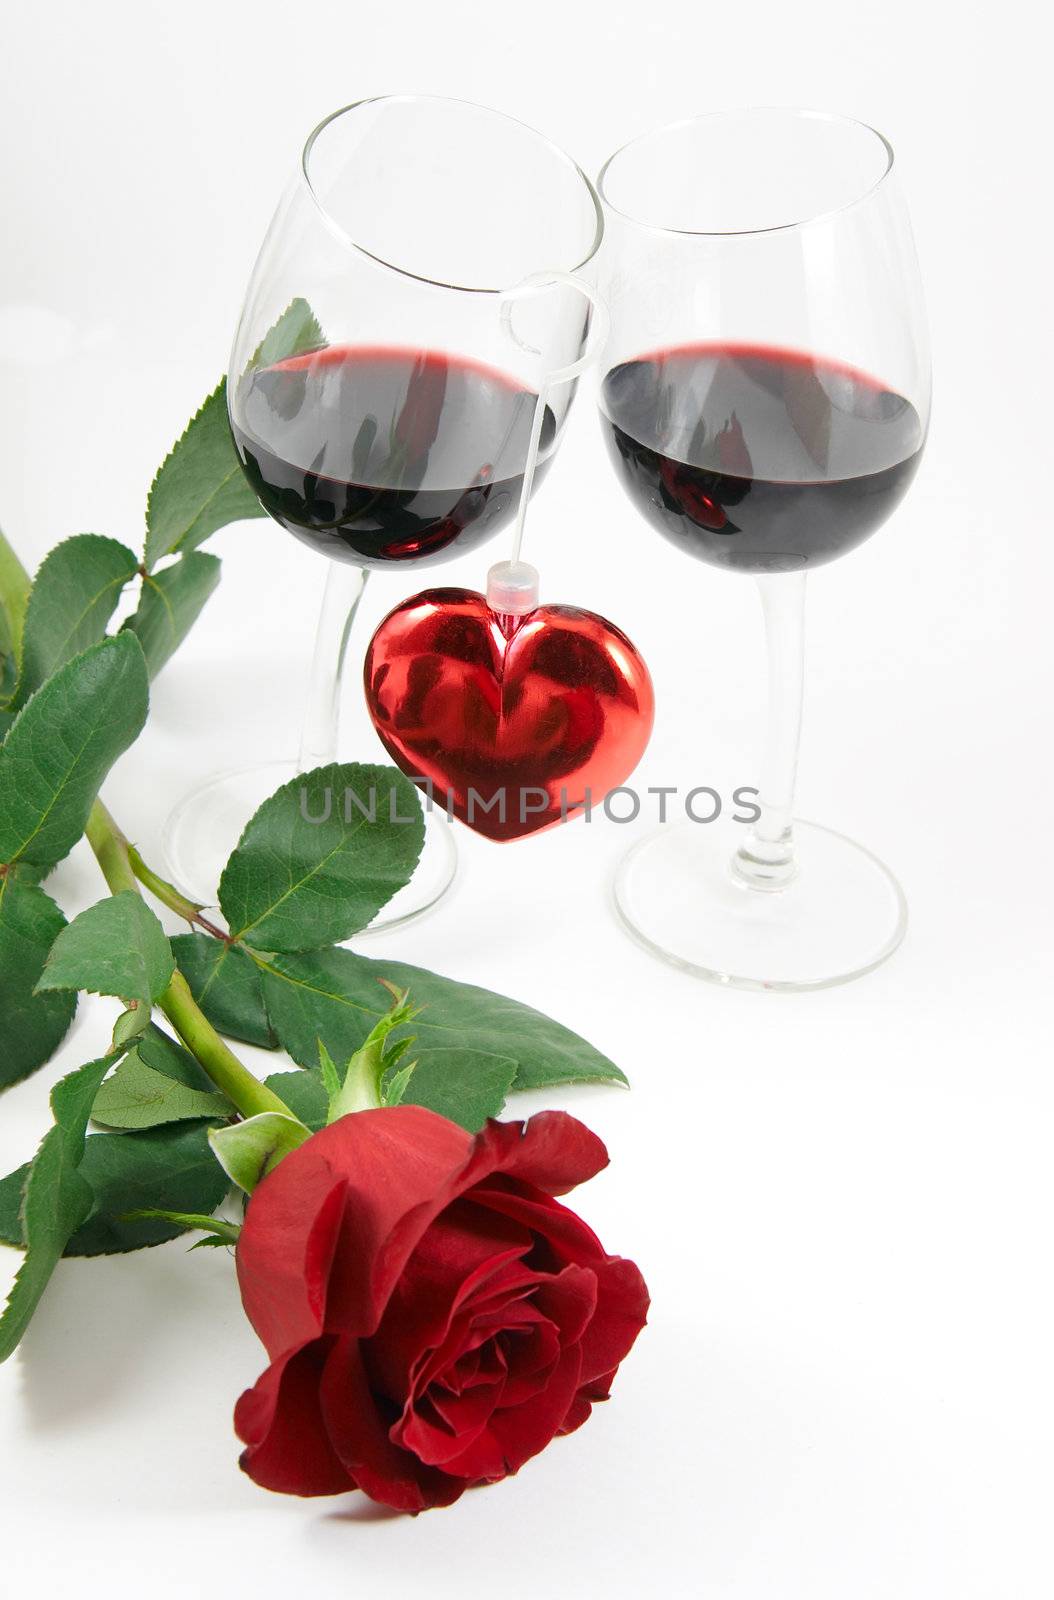 Red rose, heart and two glasses with red wine over white background